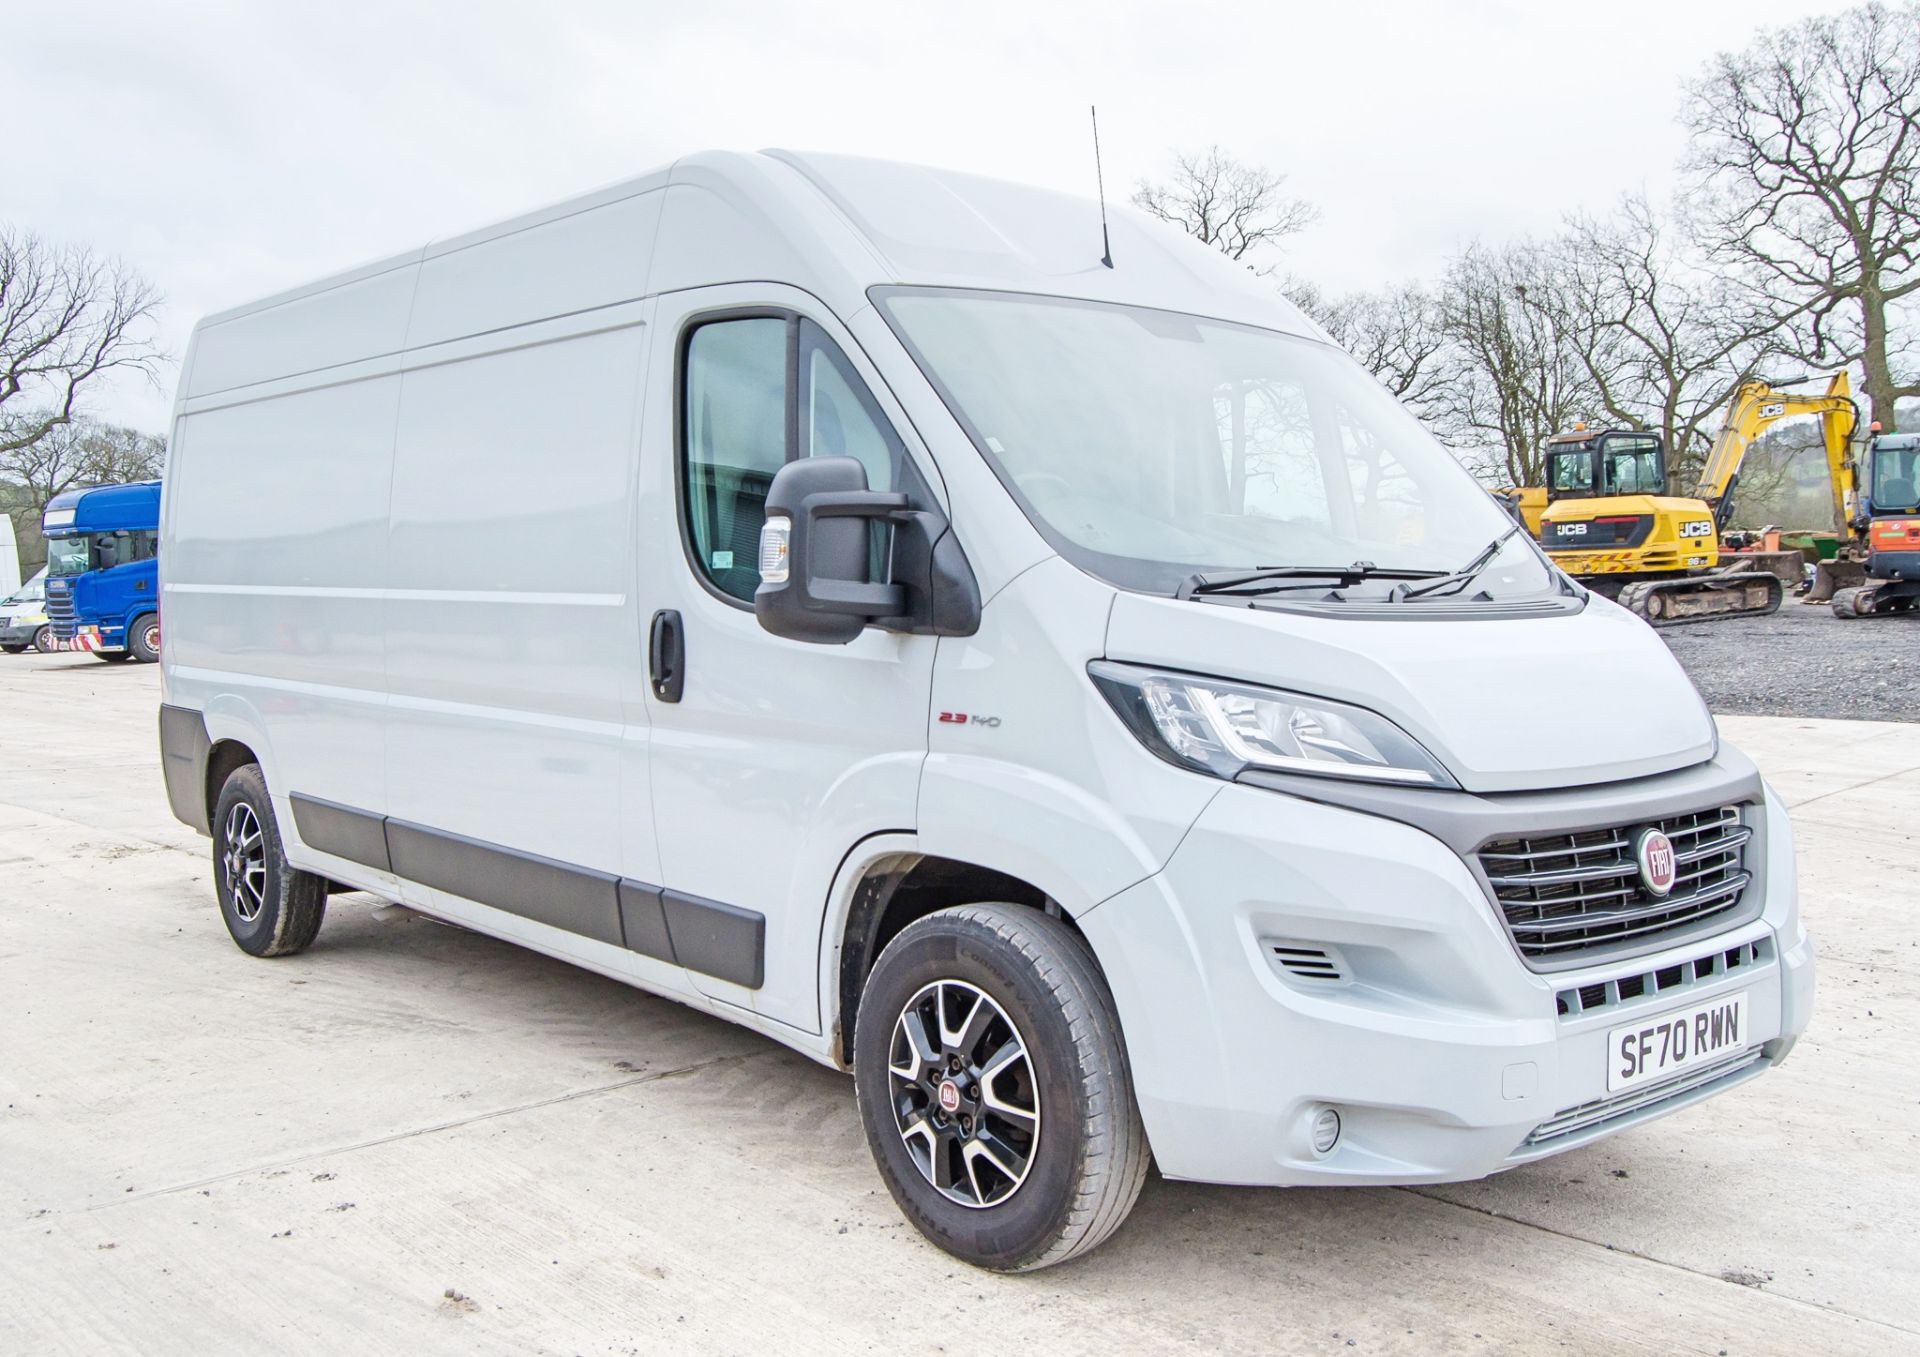 Fiat Ducato 35 Shadow 140 2.3 litre LWB panel van Registration Number: SF70 RWN Date of - Image 2 of 30